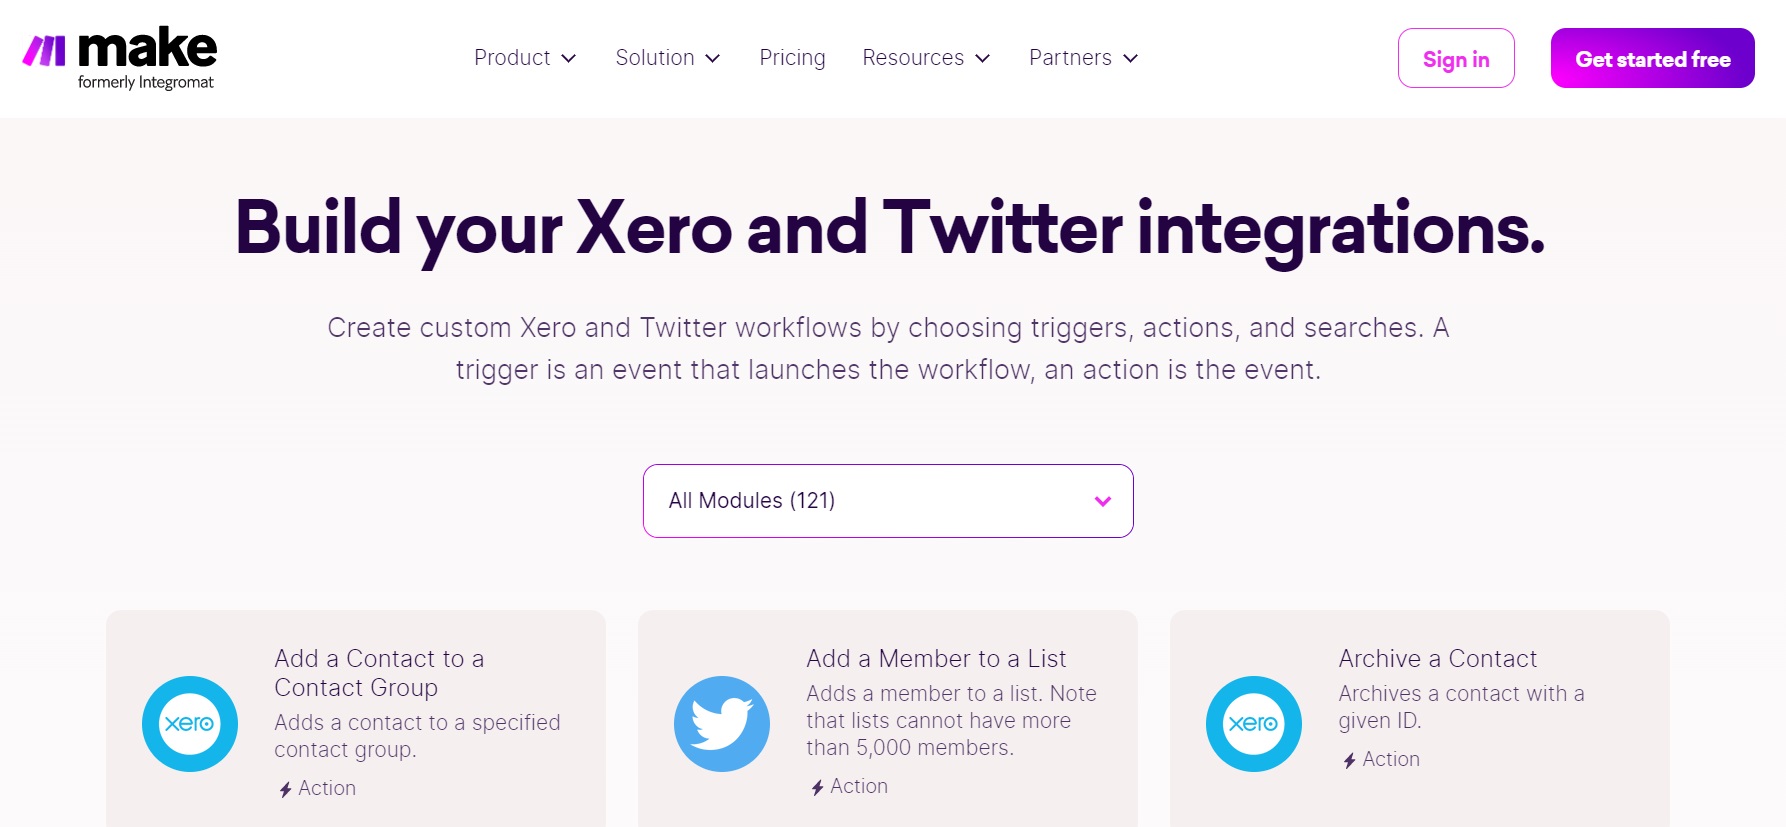 Make enables integration between Xero and Twitter - Xero Training Courses from EzyLearn & Career Academy